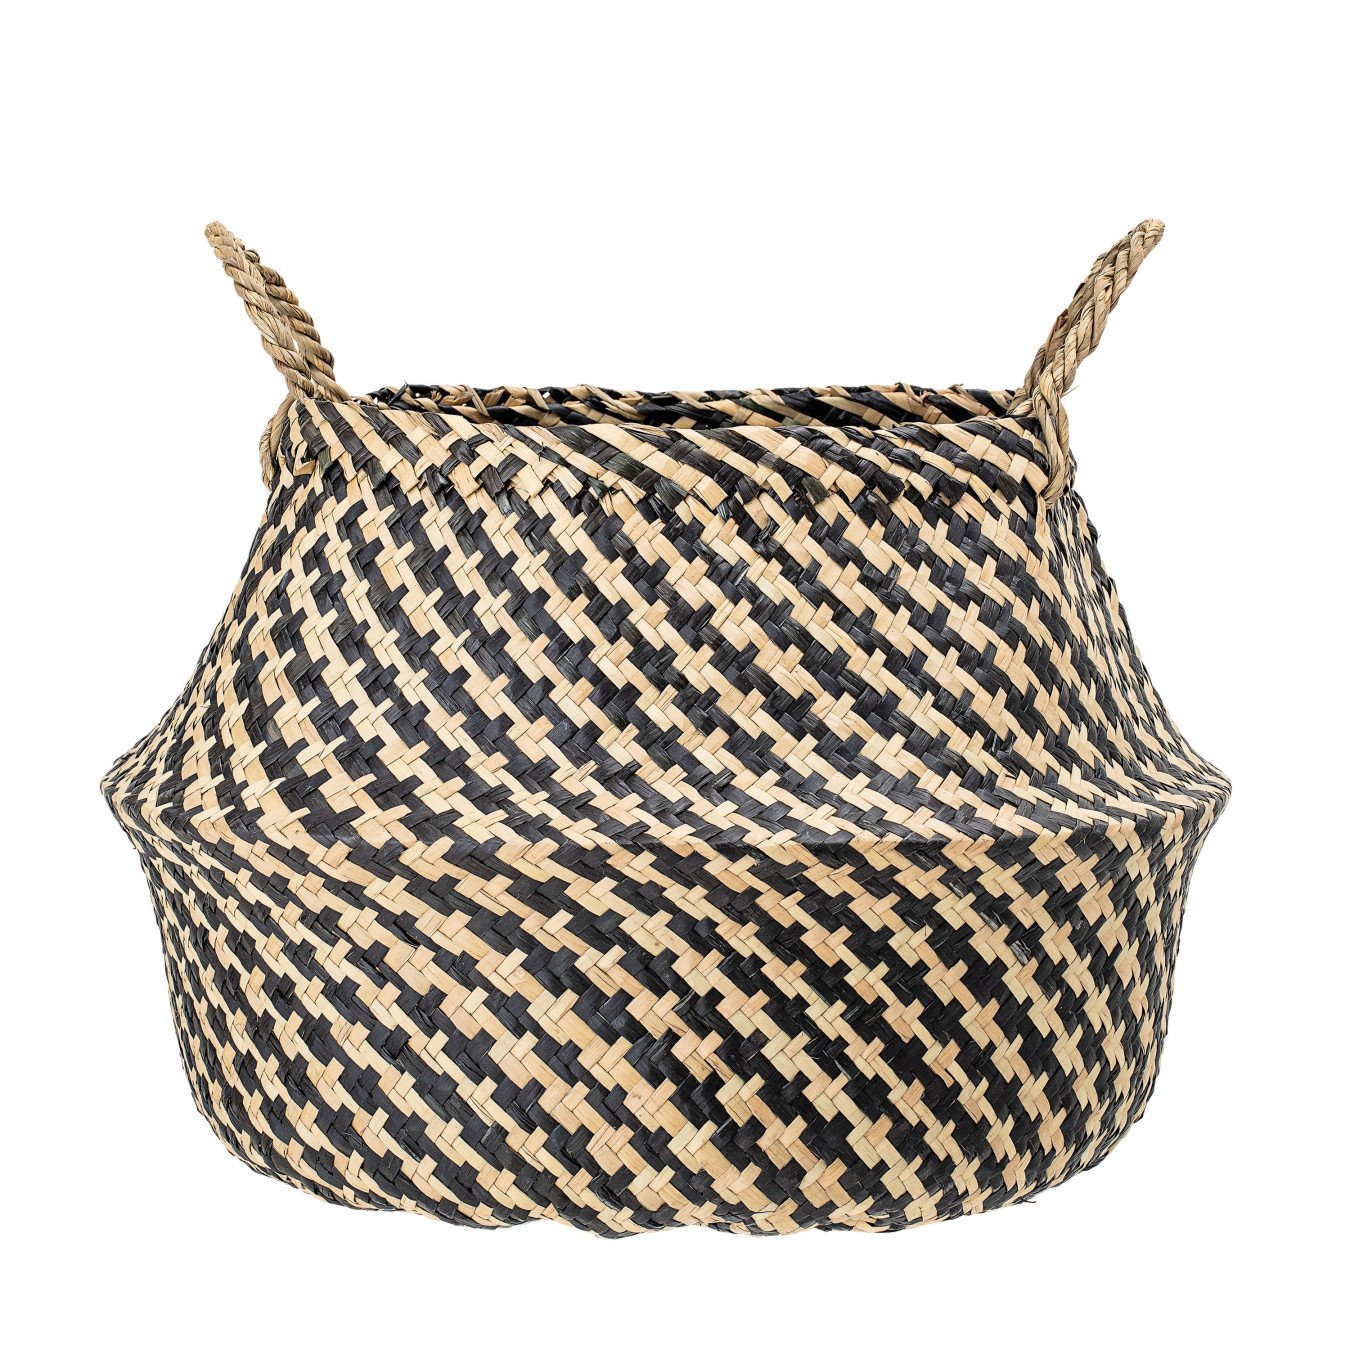 Black & Beige Woven Seagrass Basket with Handles